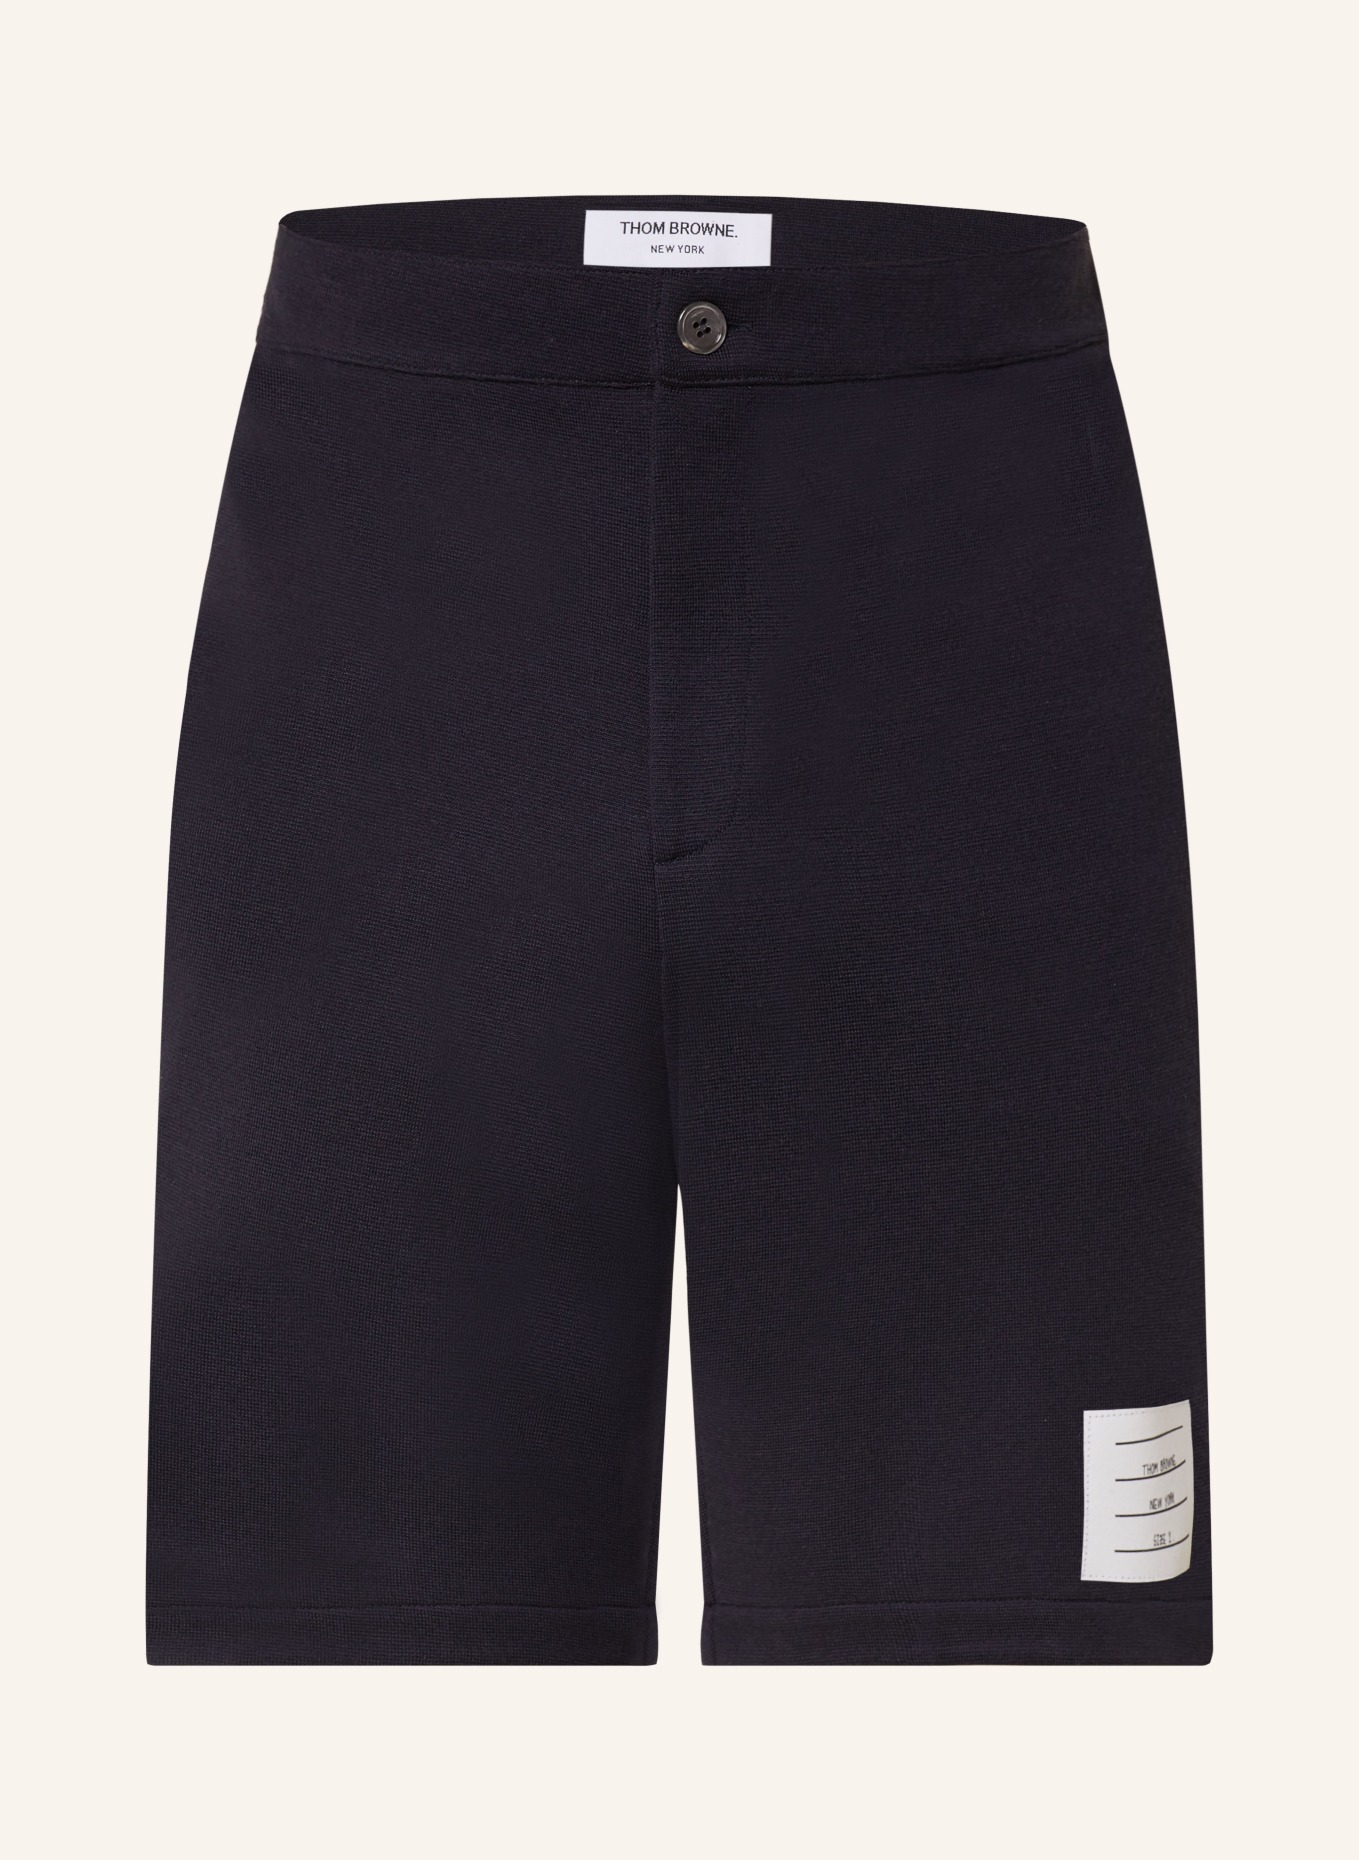 THOM BROWNE. Knit shorts made of merino wool, Color: DARK BLUE (Image 1)